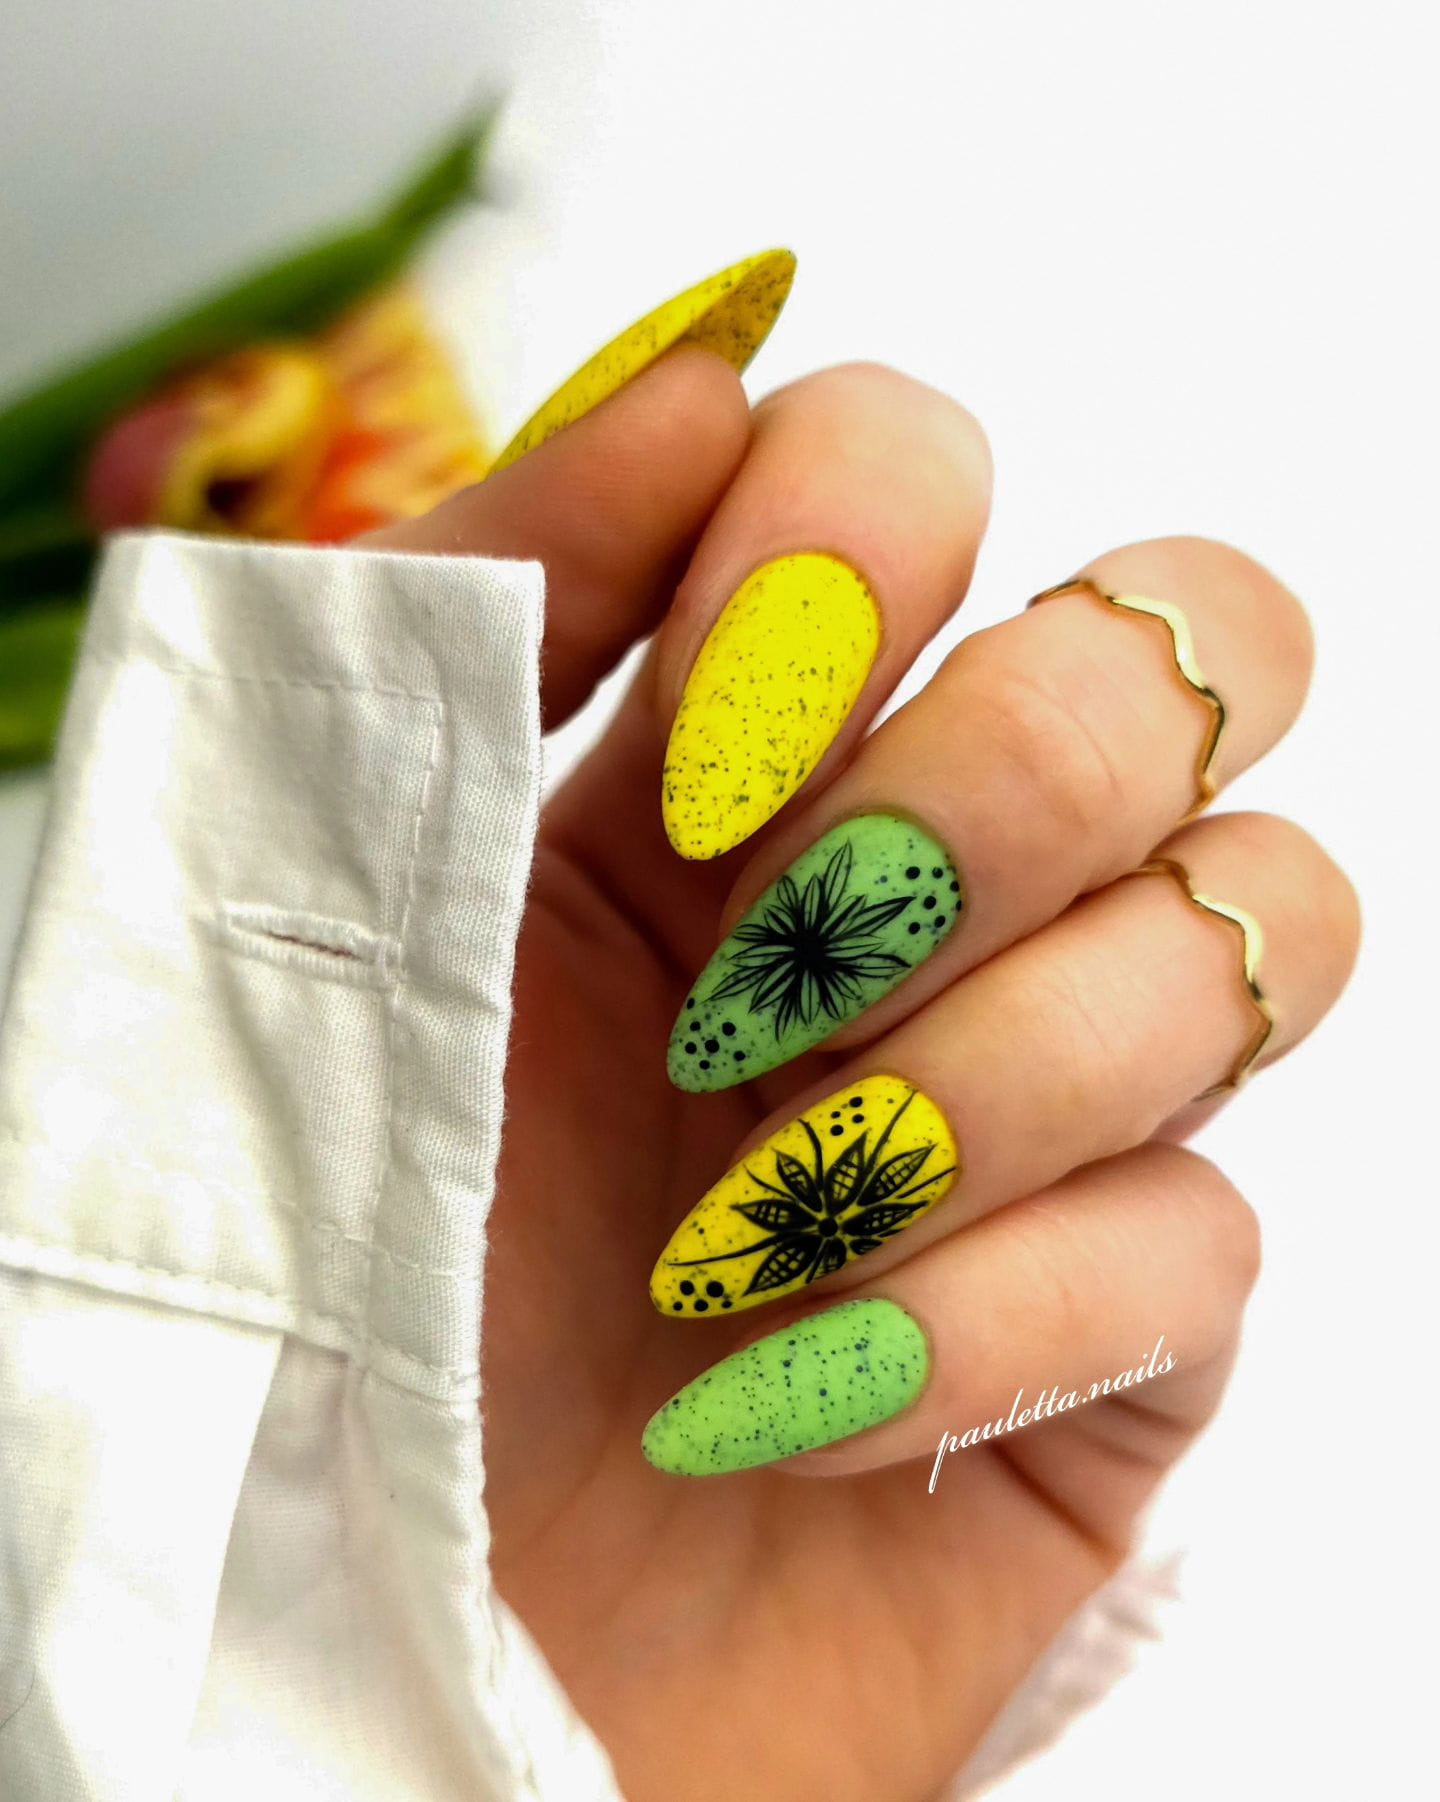 100+ Short Nail Designs You’ll Want To Try This Year images 73